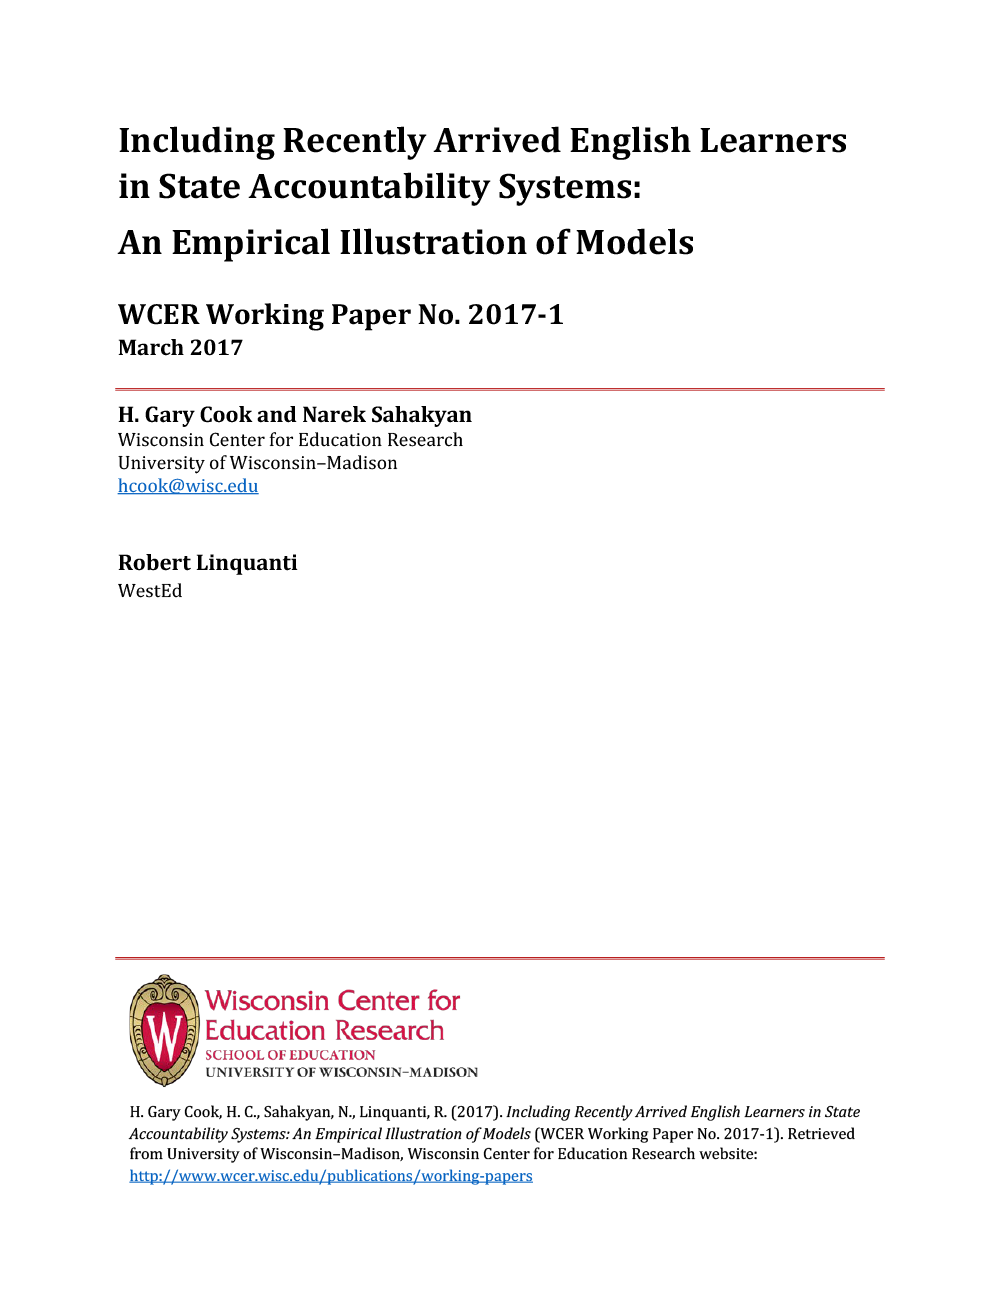 Including Recently Arrived English Learners in State Accountability Systems: An Empirical Illustration of Models